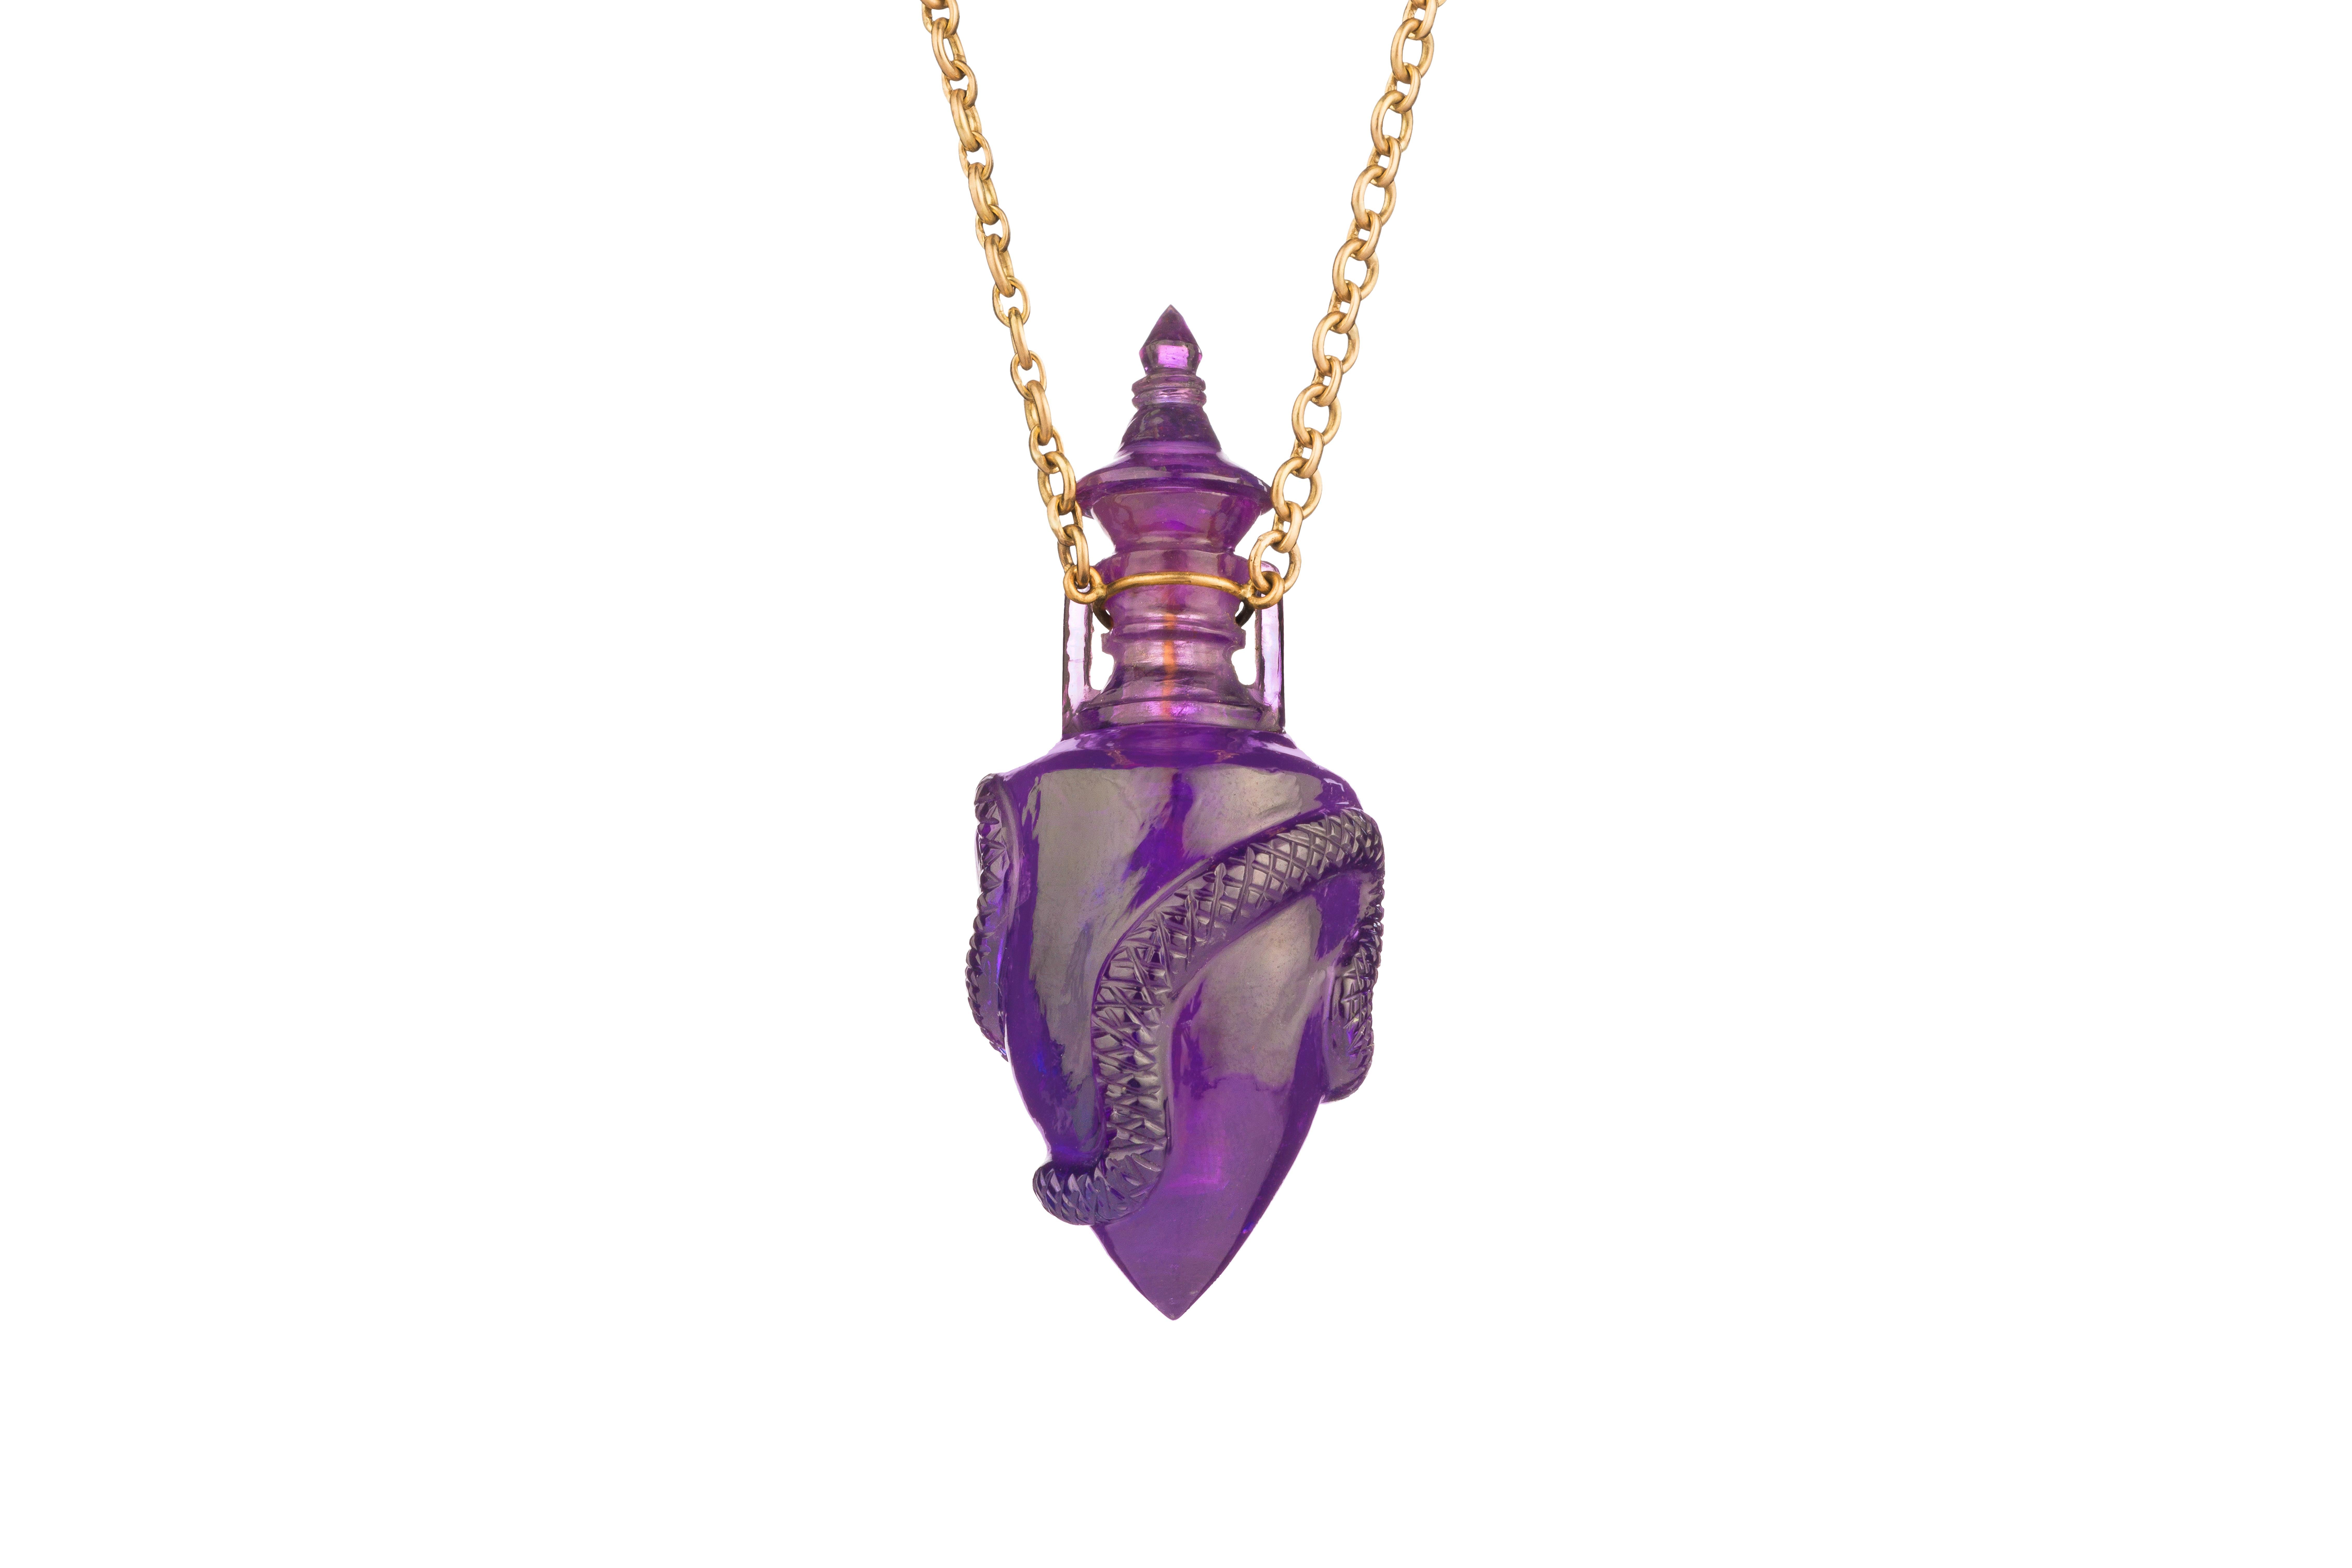 PICK YOUR POSION by OUROBOROS
Hand-carved amethyst poison bottle pendant on an 18kt gold chain. 
The bottle can be opened. 

If this item is out of stock. Everything is made to order and can take 4-6 weeks.

OUROBOROS is an artisanal brand, based